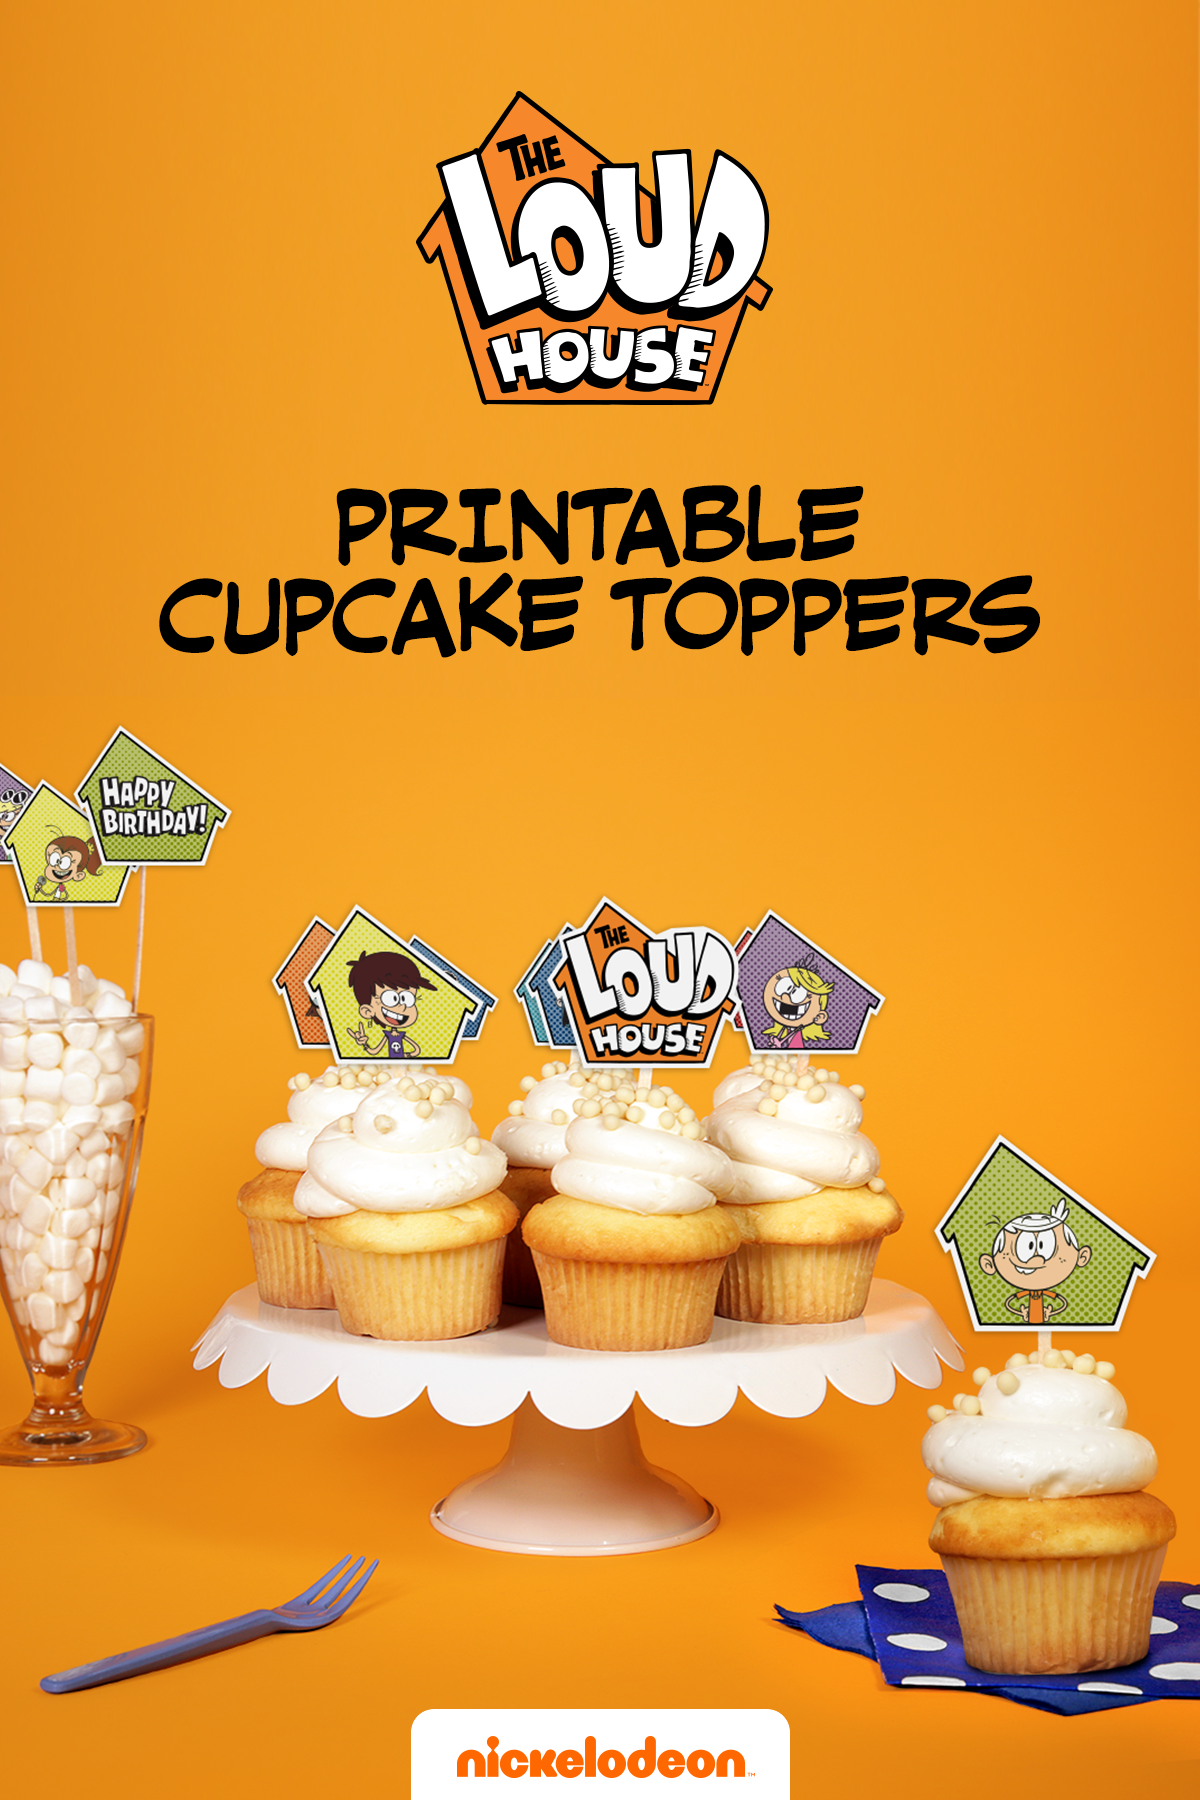 The Loud House Cupcake Toppers